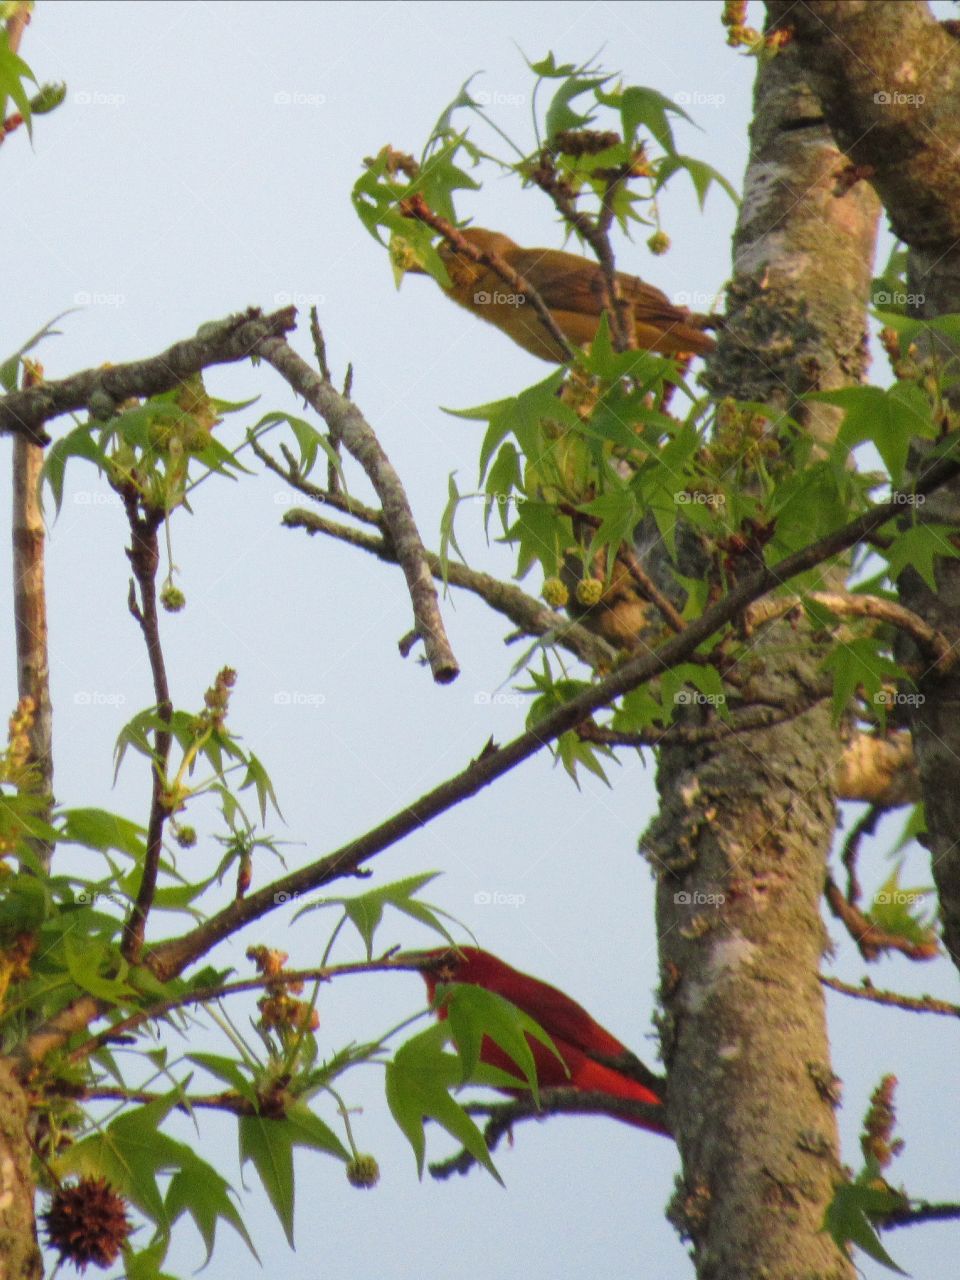 Male (bottom) and female (top) summer Tanager in a sweet gum tree